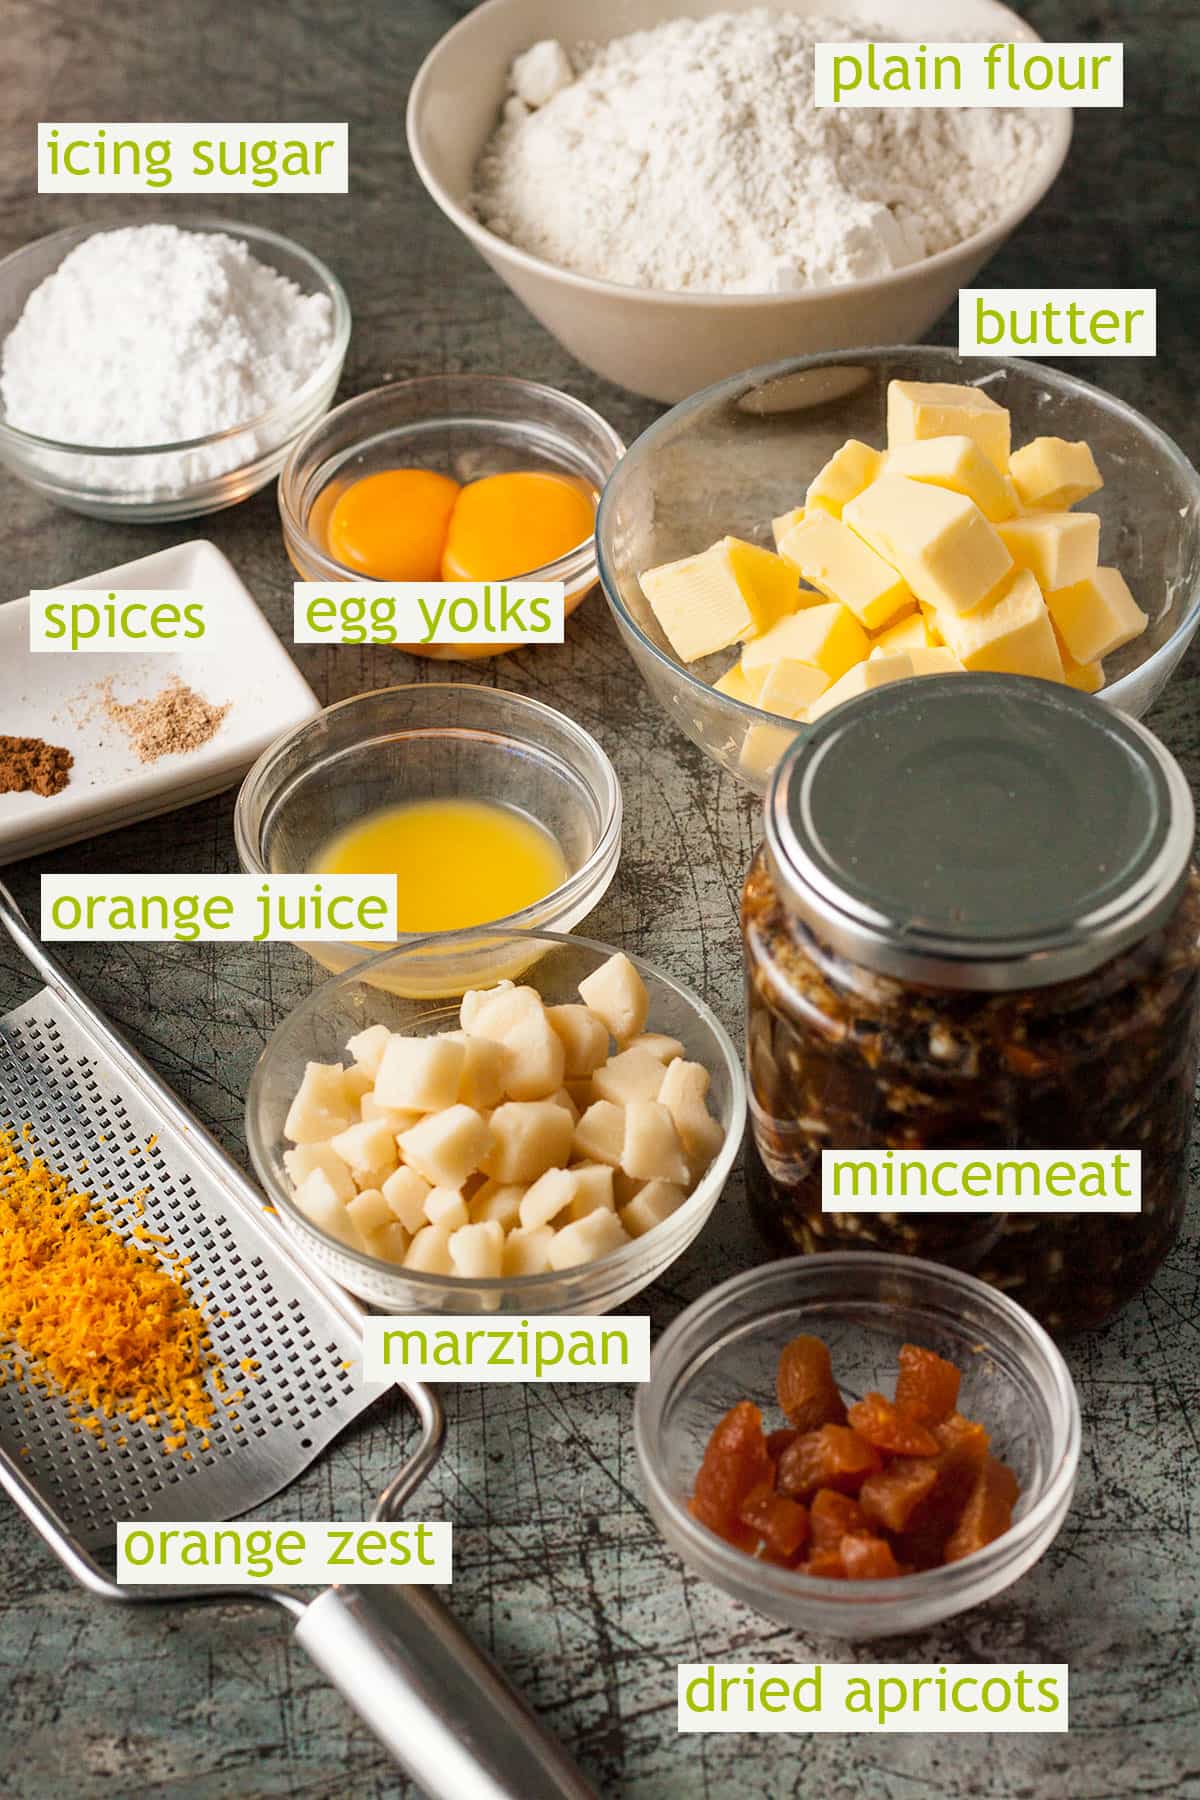 ingredients required to make mince pies with marzipan and apricots.